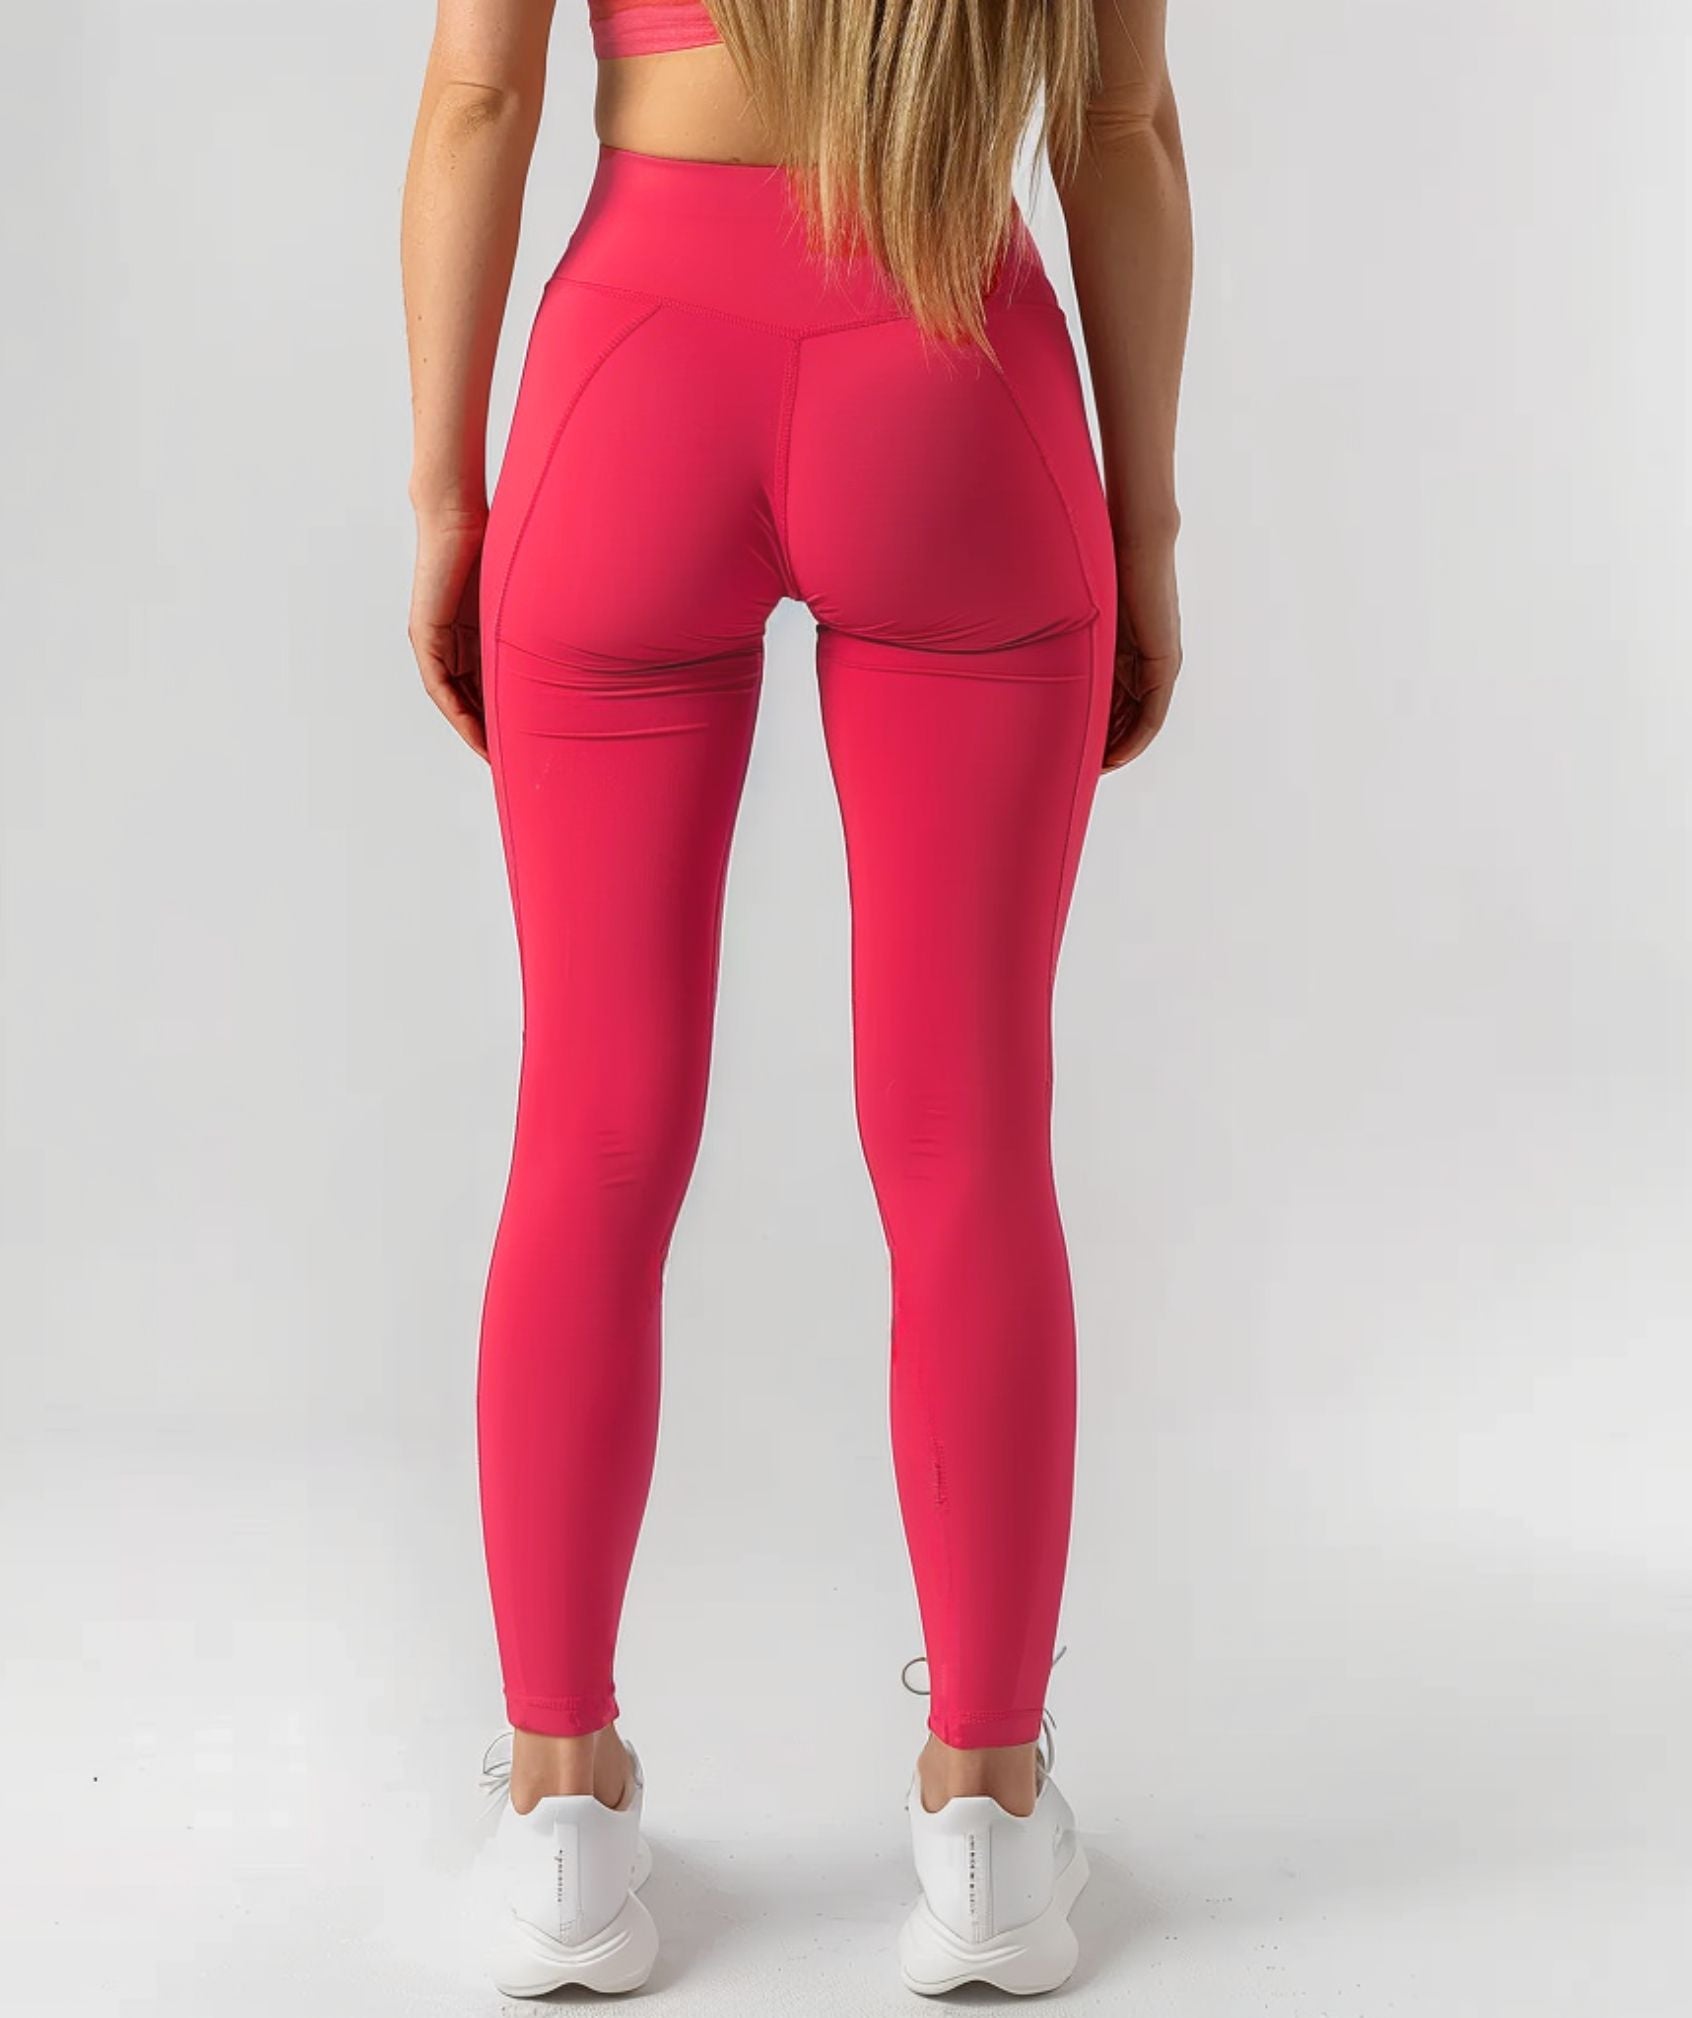 Apex™ red Harmony Leggings back view - sustainable activewear